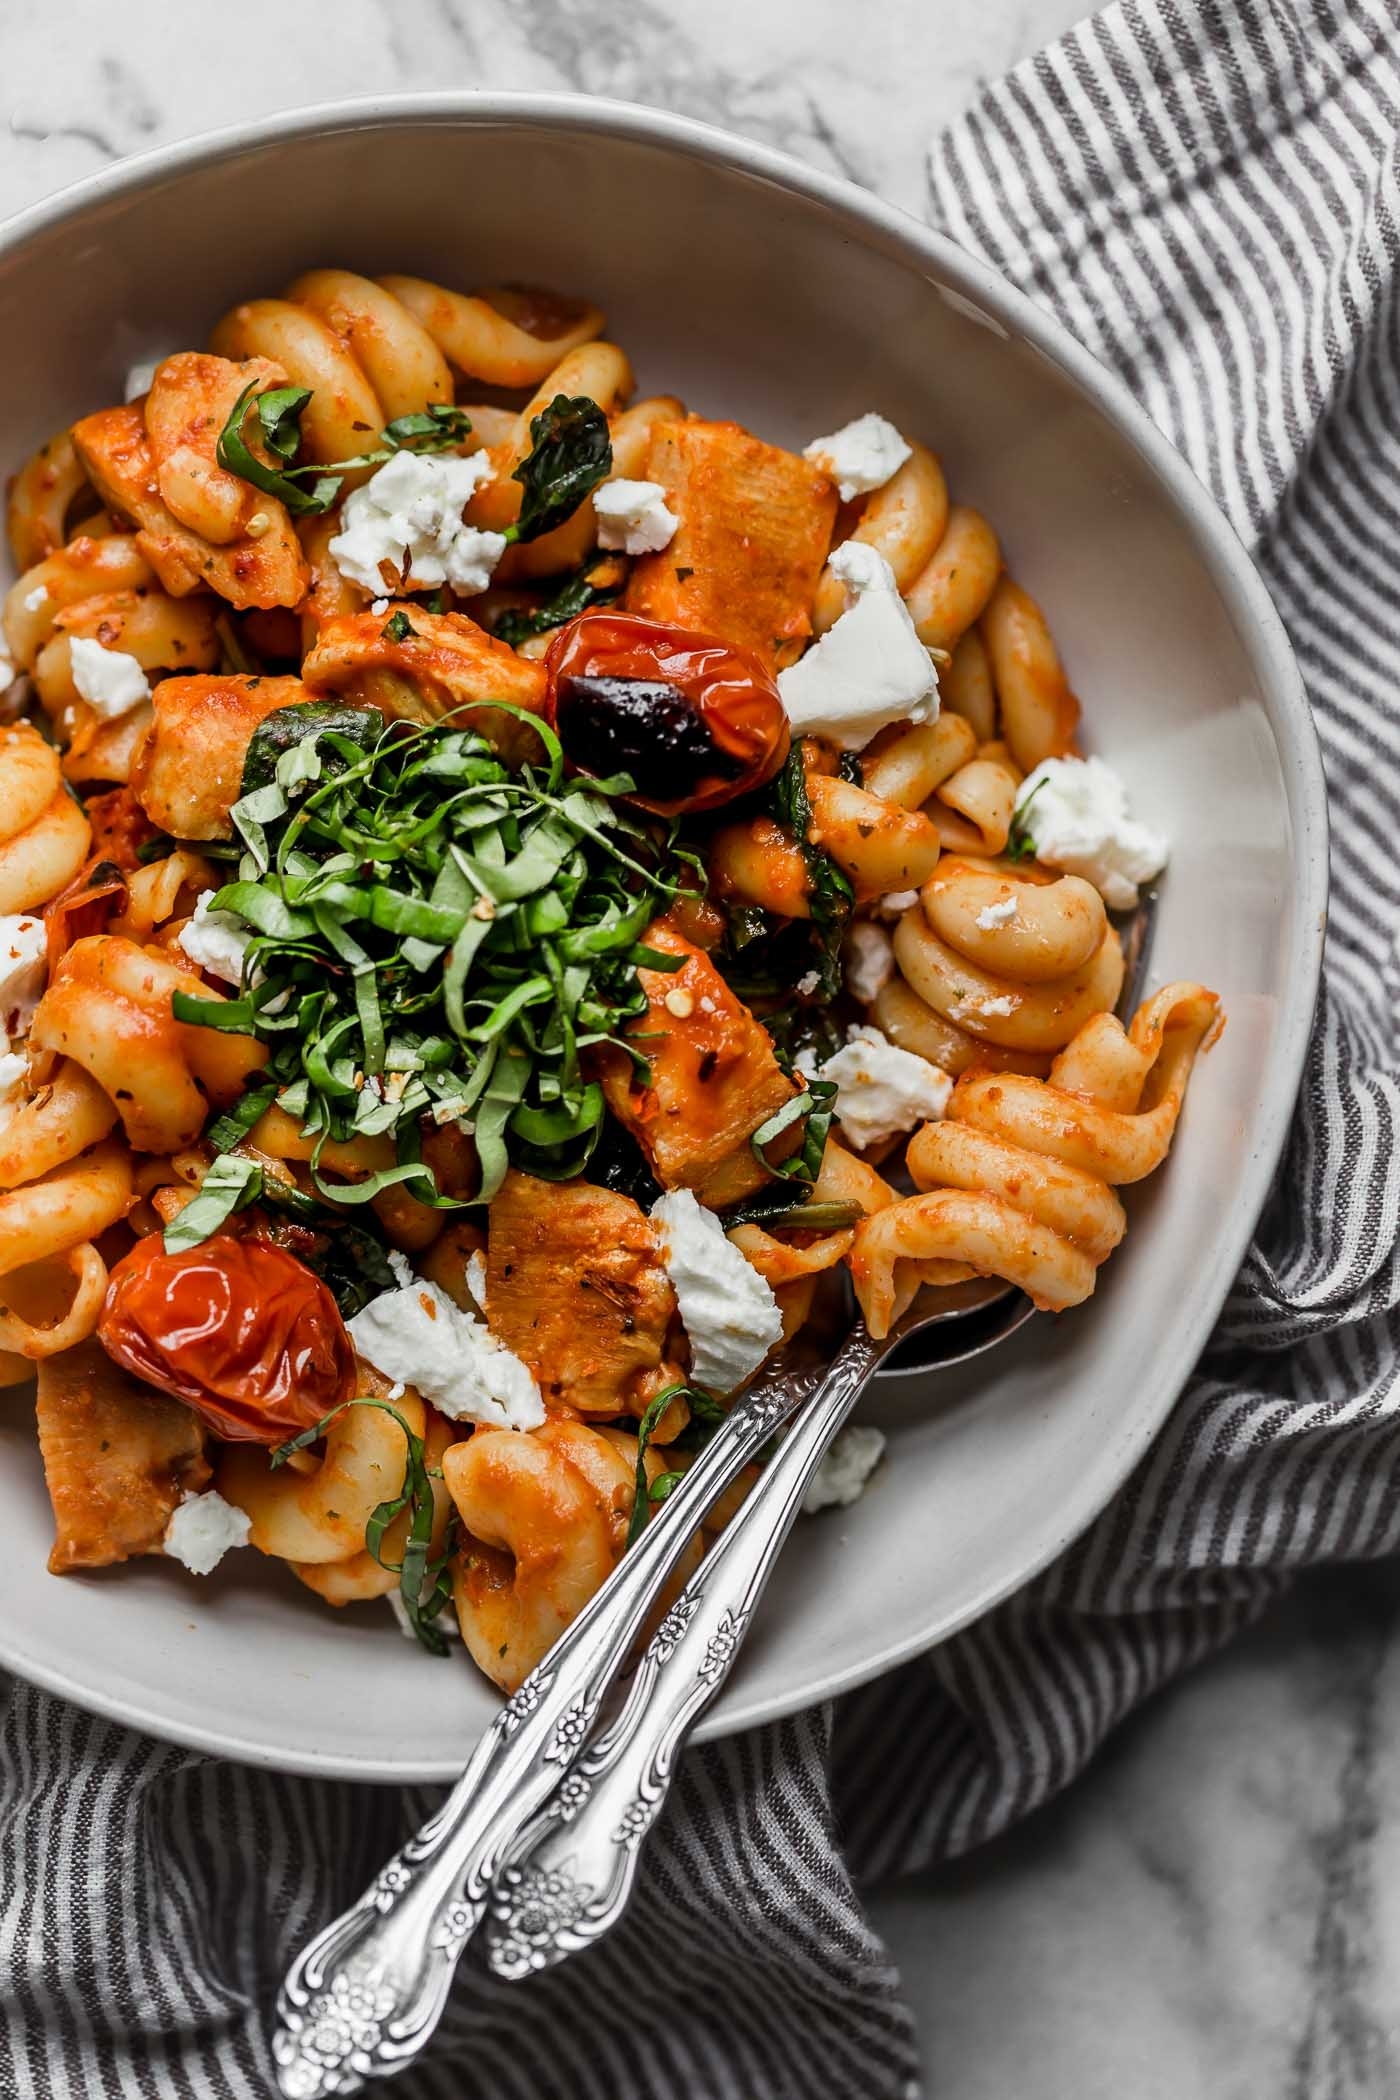 Pasta with tomatoes, goat cheese, and basil